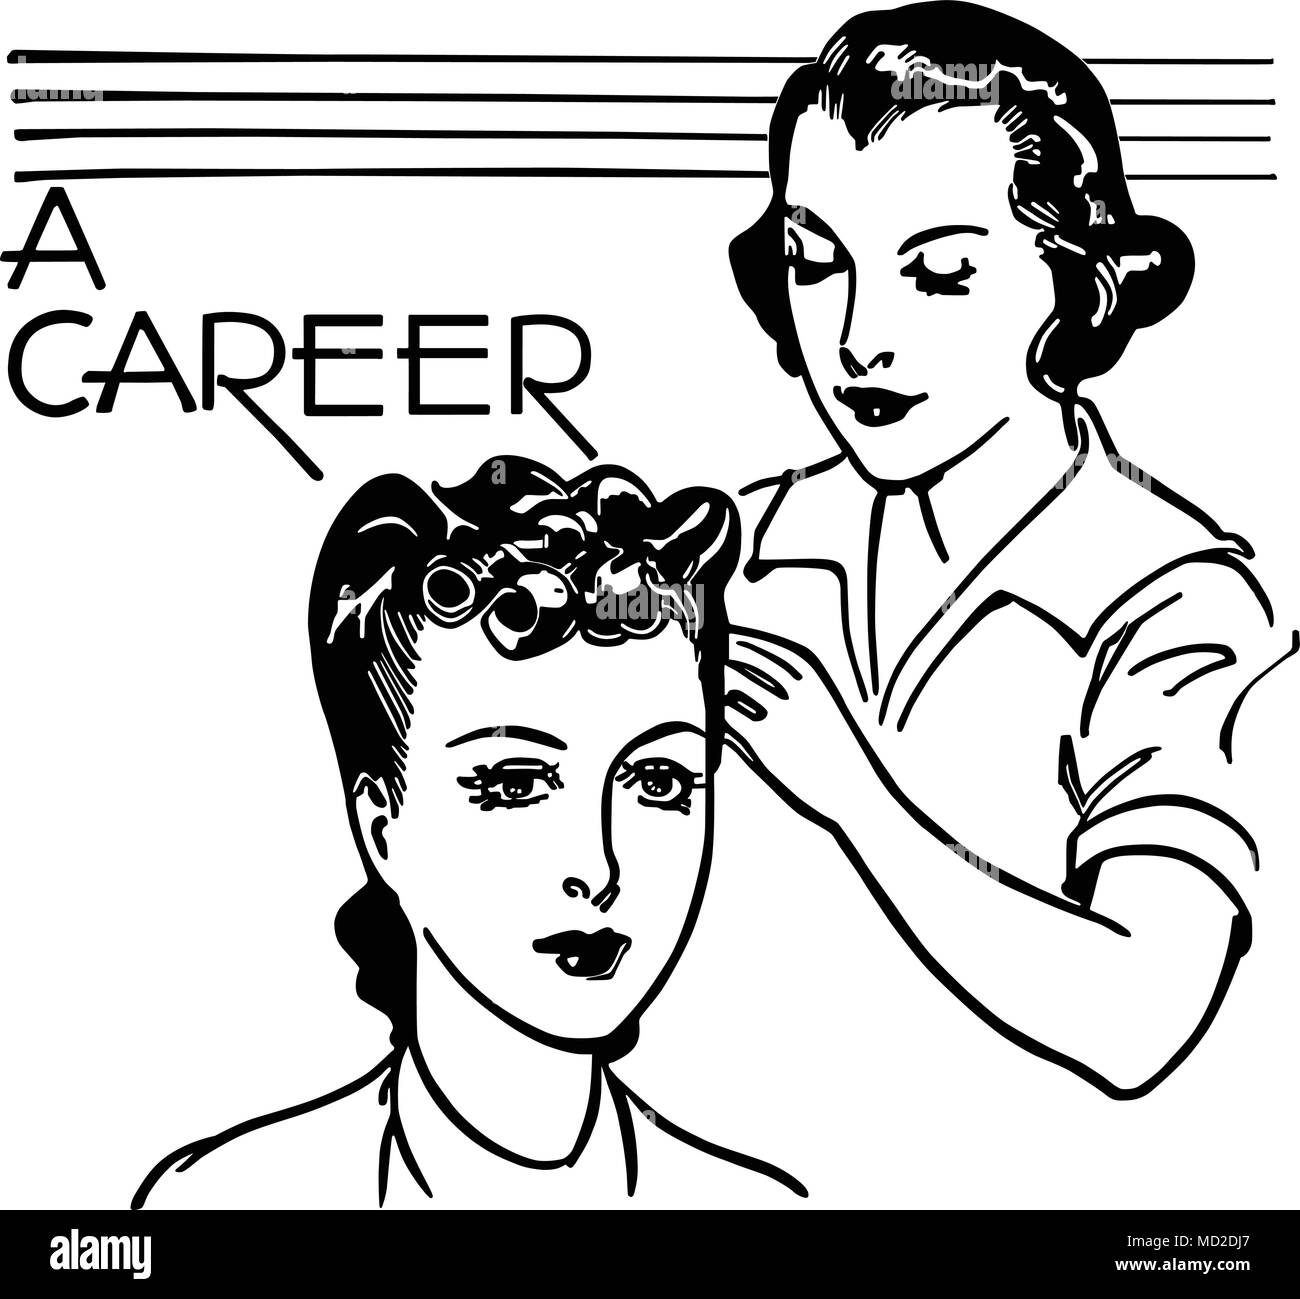 A Career In Hairdressing - Retro Clipart Banner Stock Vector